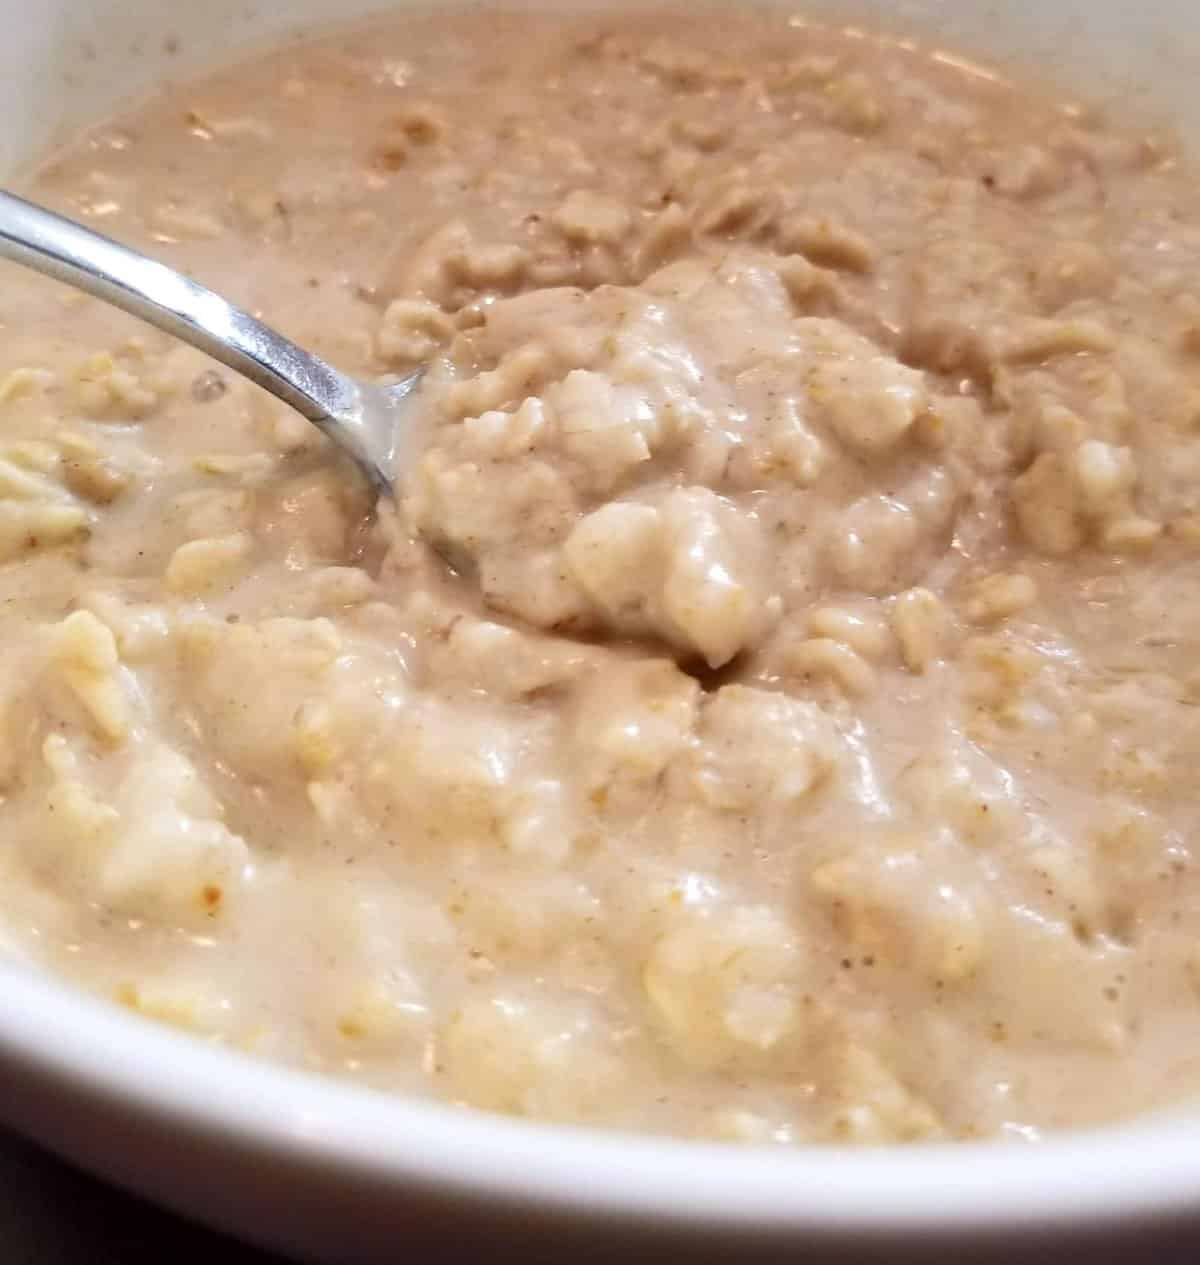  Creamy, nutty and delicious - this porridge is the ultimate breakfast treat